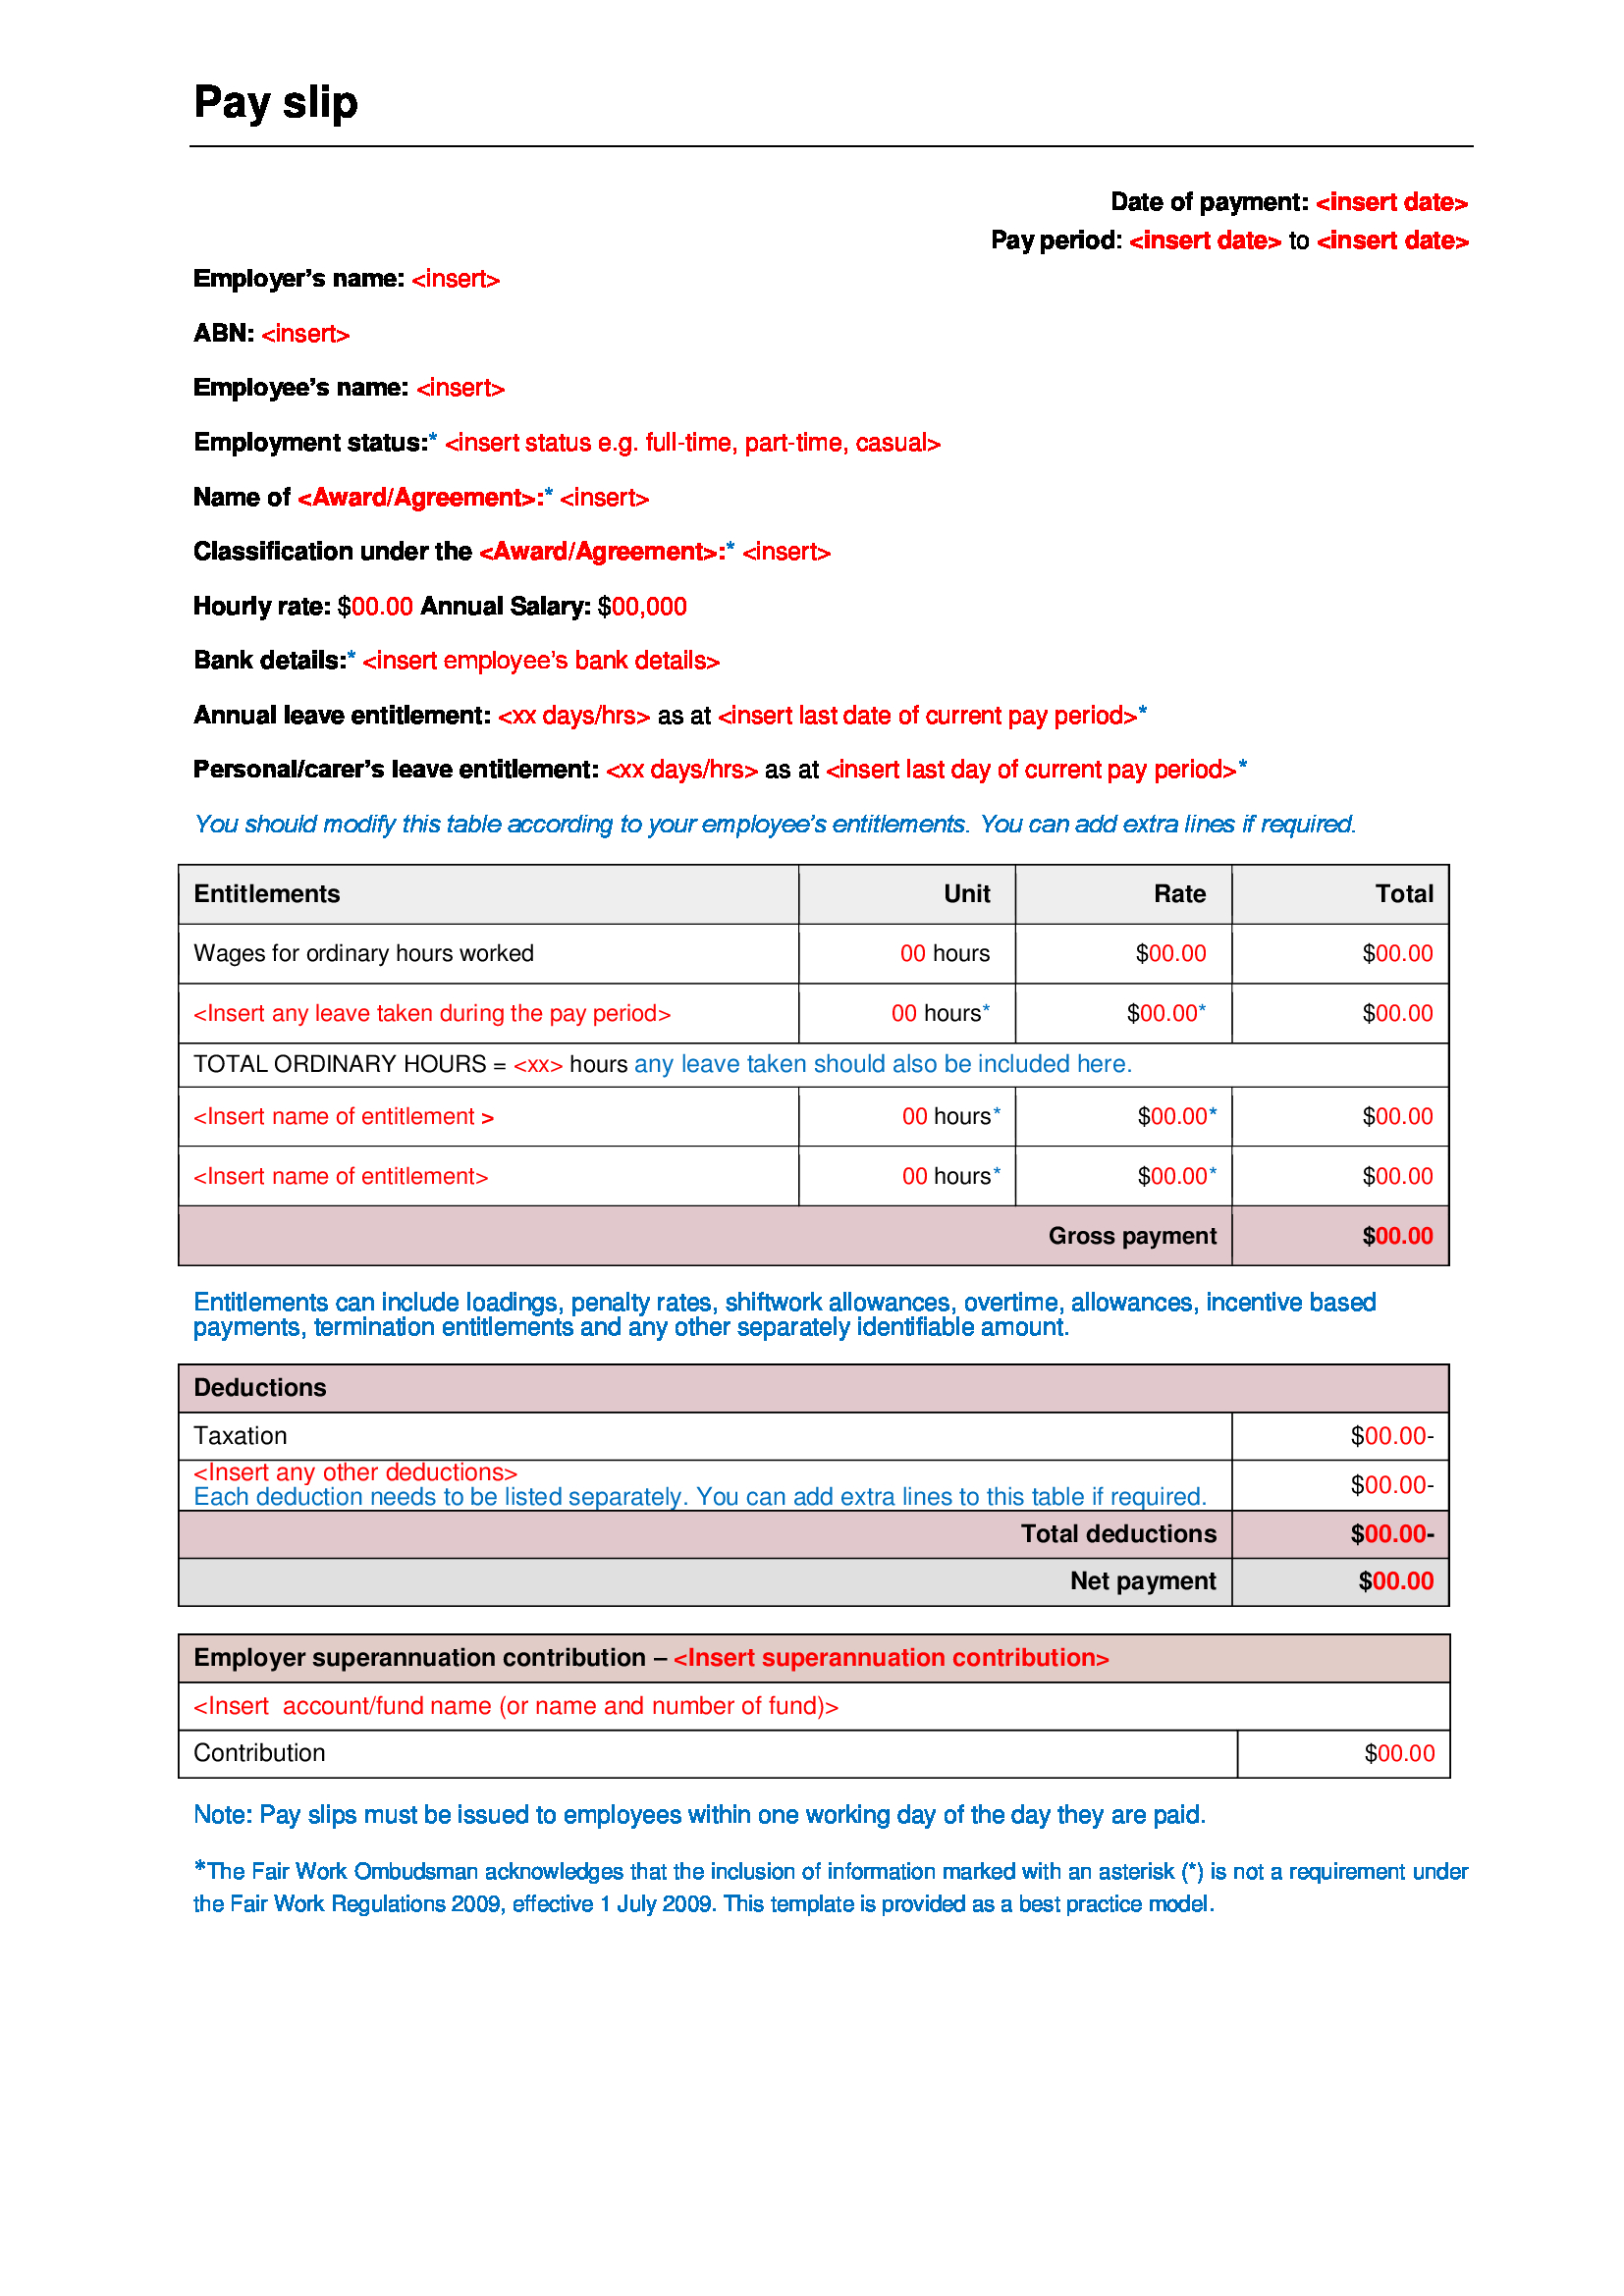 payslip template example